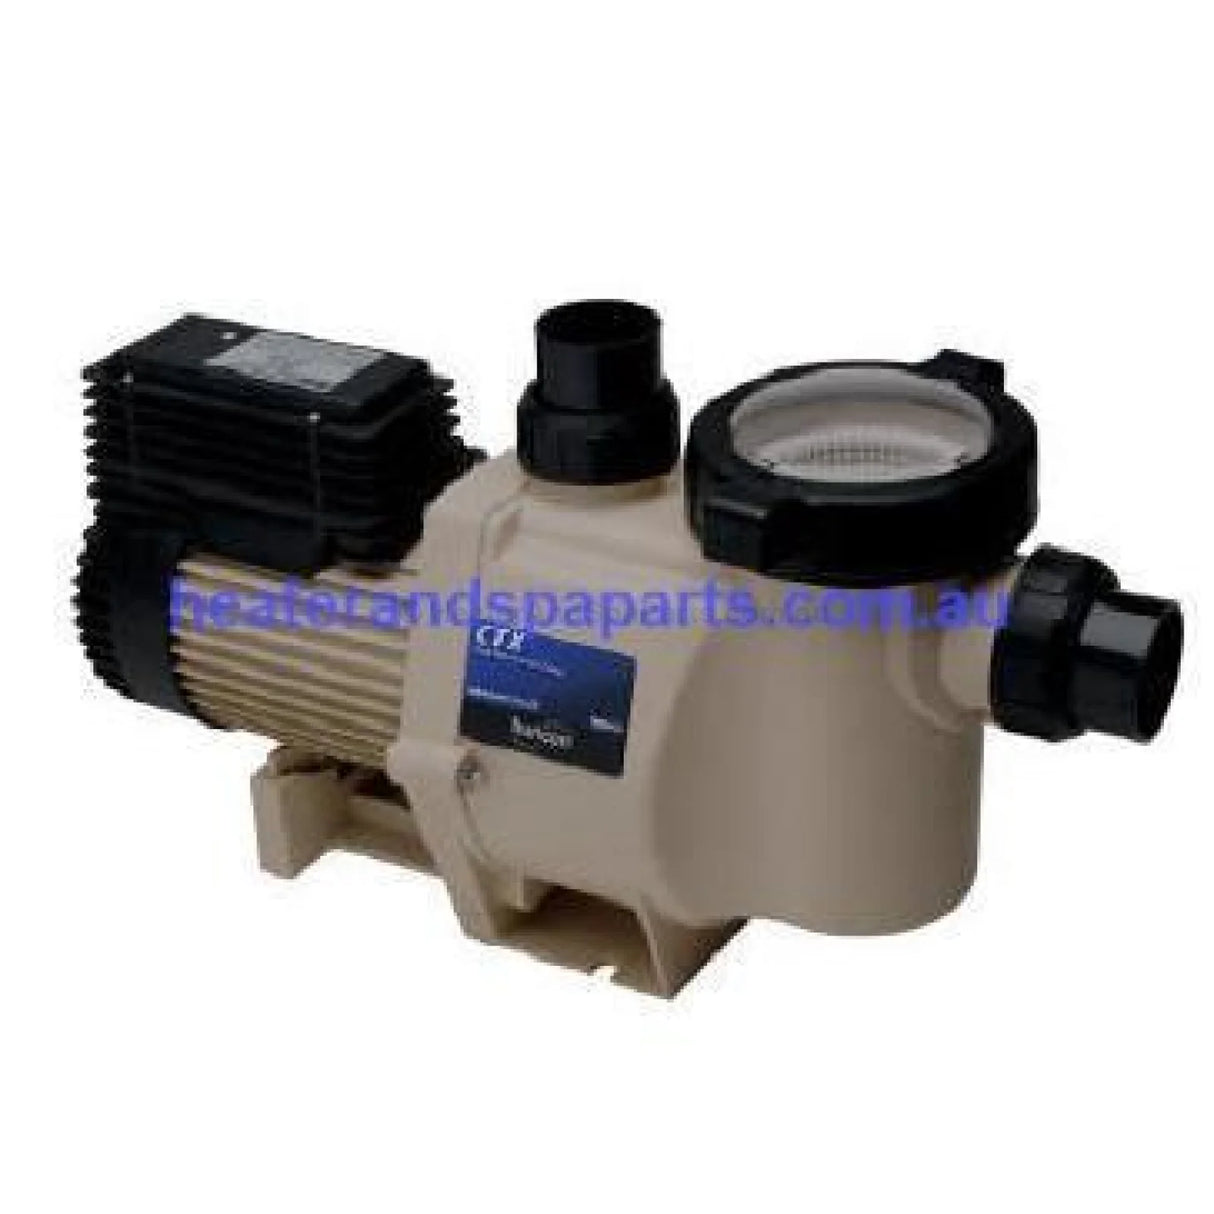 Astralpool Hurlcon CTX 180/280/360/400/500 Pool & Spa Pumps - Replaces CX TX Directly - Heater and Spa Parts